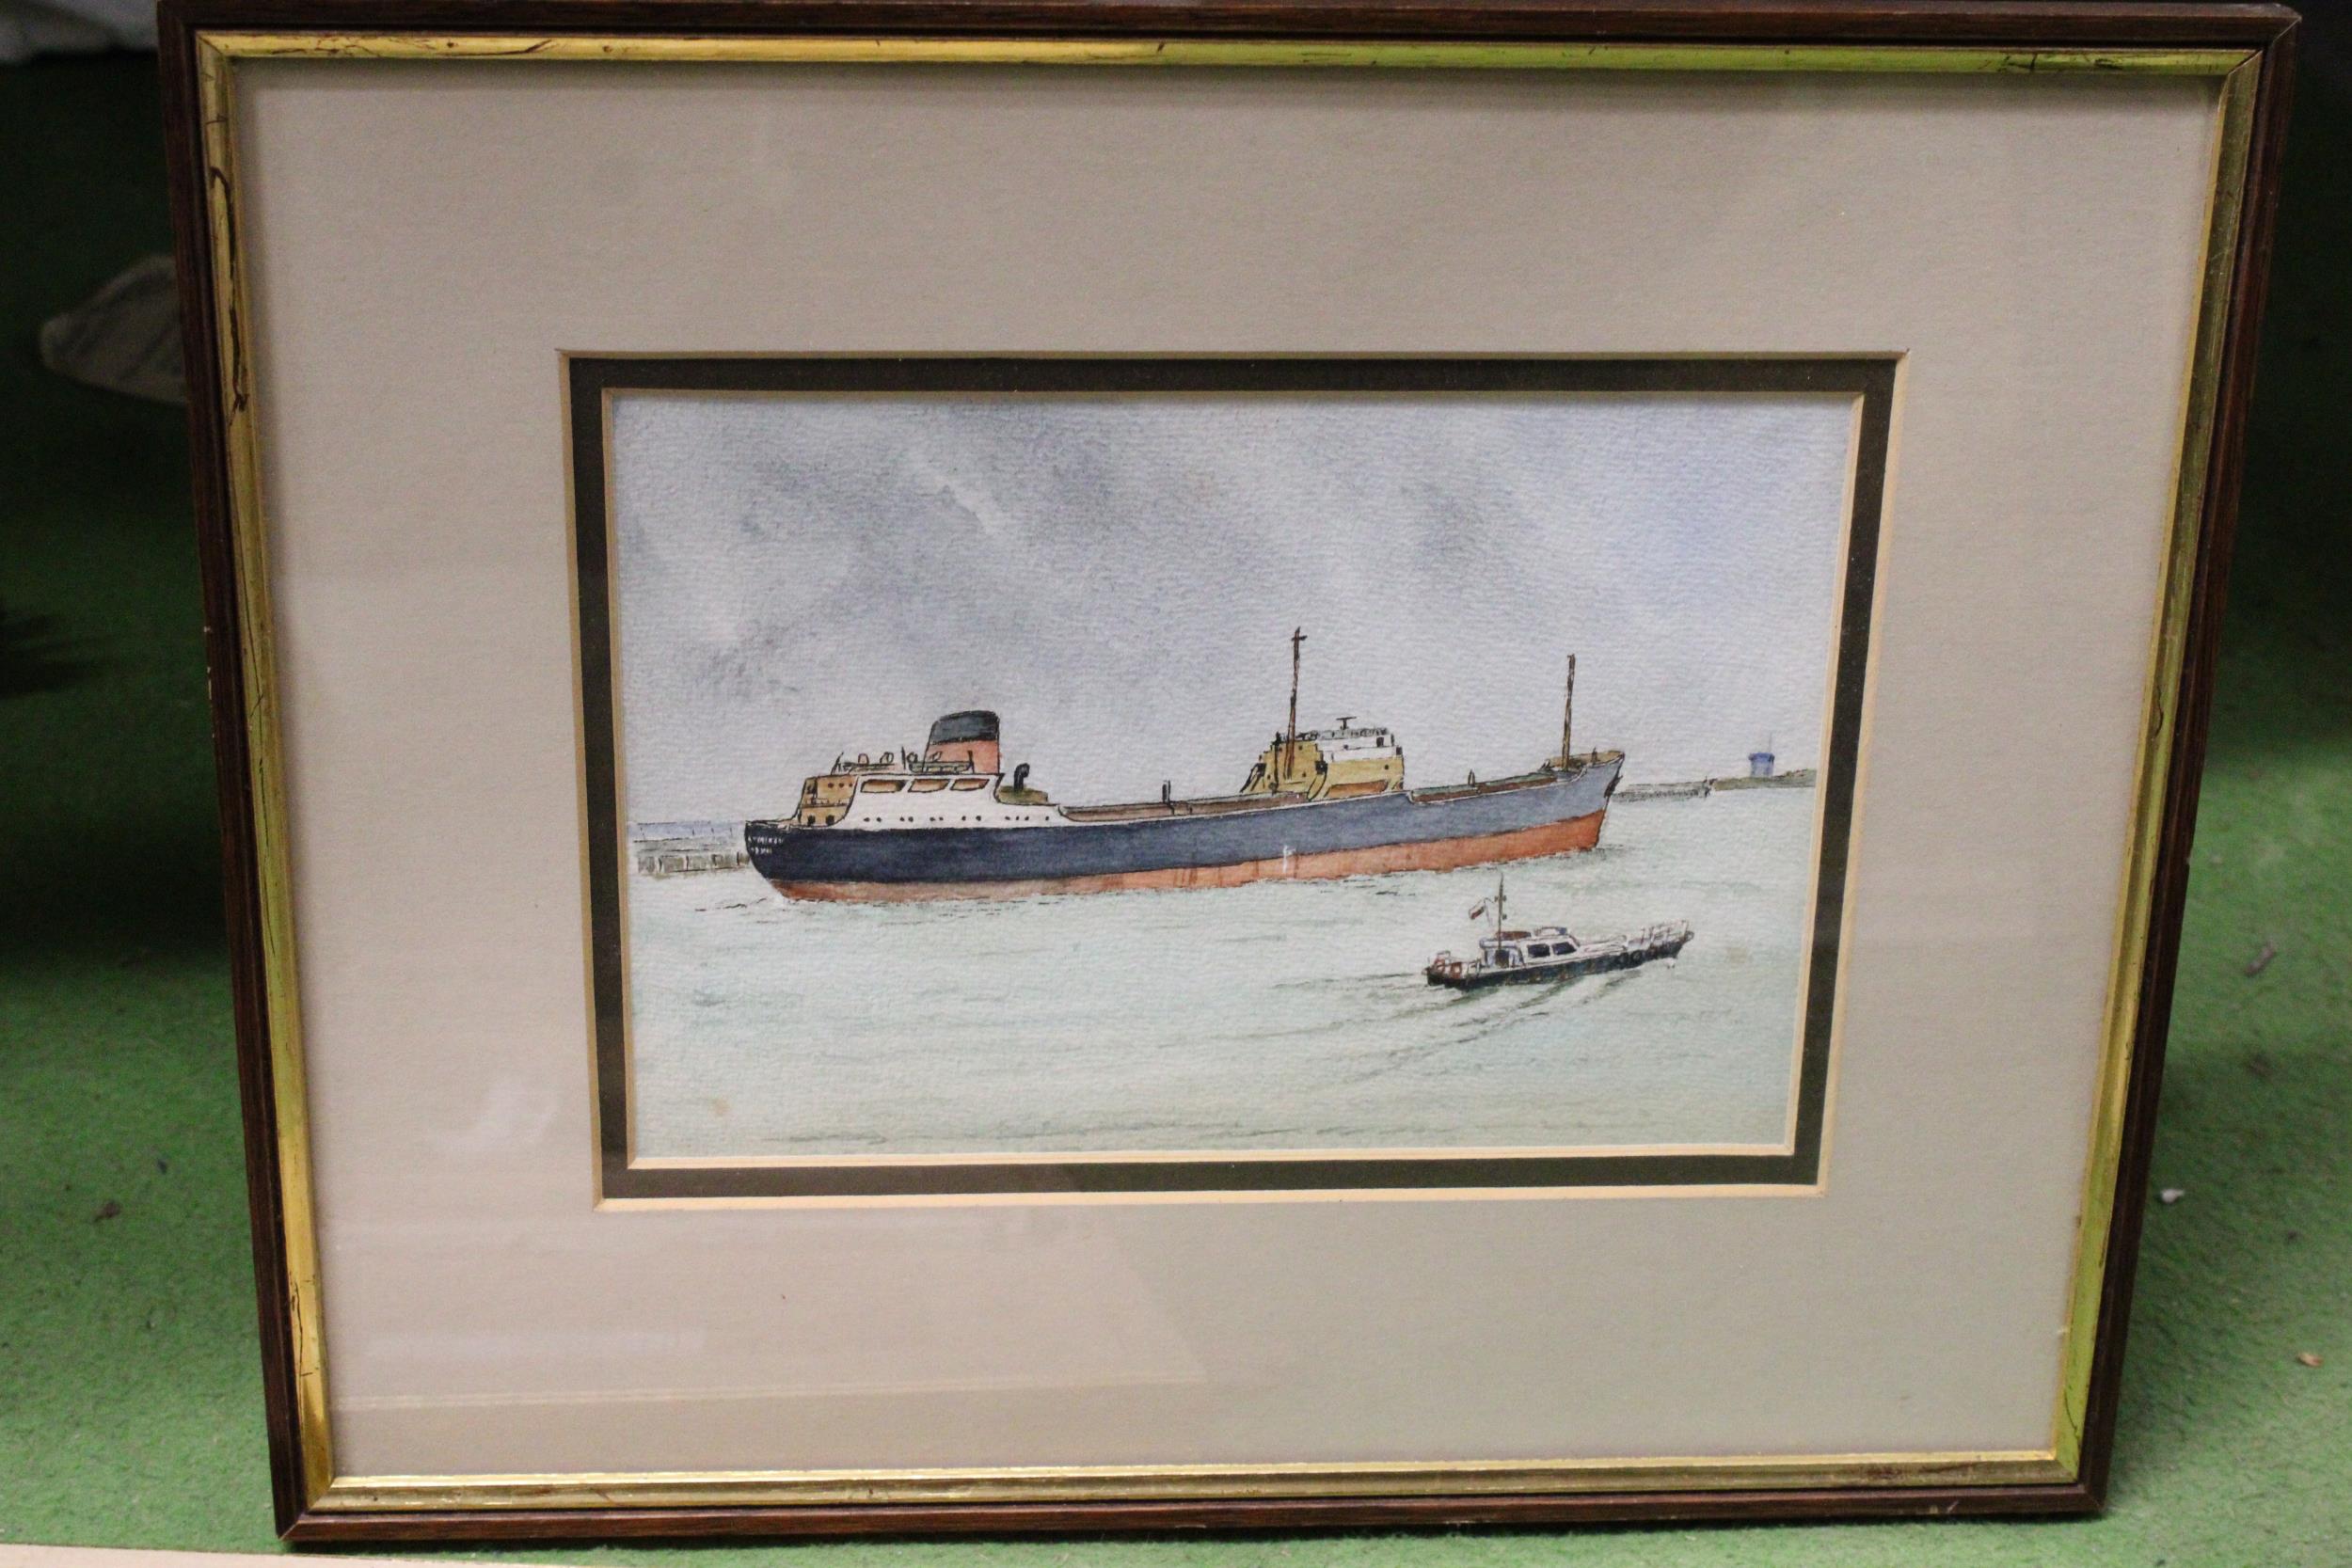 TWO FRAMED WATERCOLOURS TO INCLUDE, S V 'JAMES ROWAN', COLLIER, LEAVING SHOREHAM, 1983, WITHDRAWN - Image 4 of 4